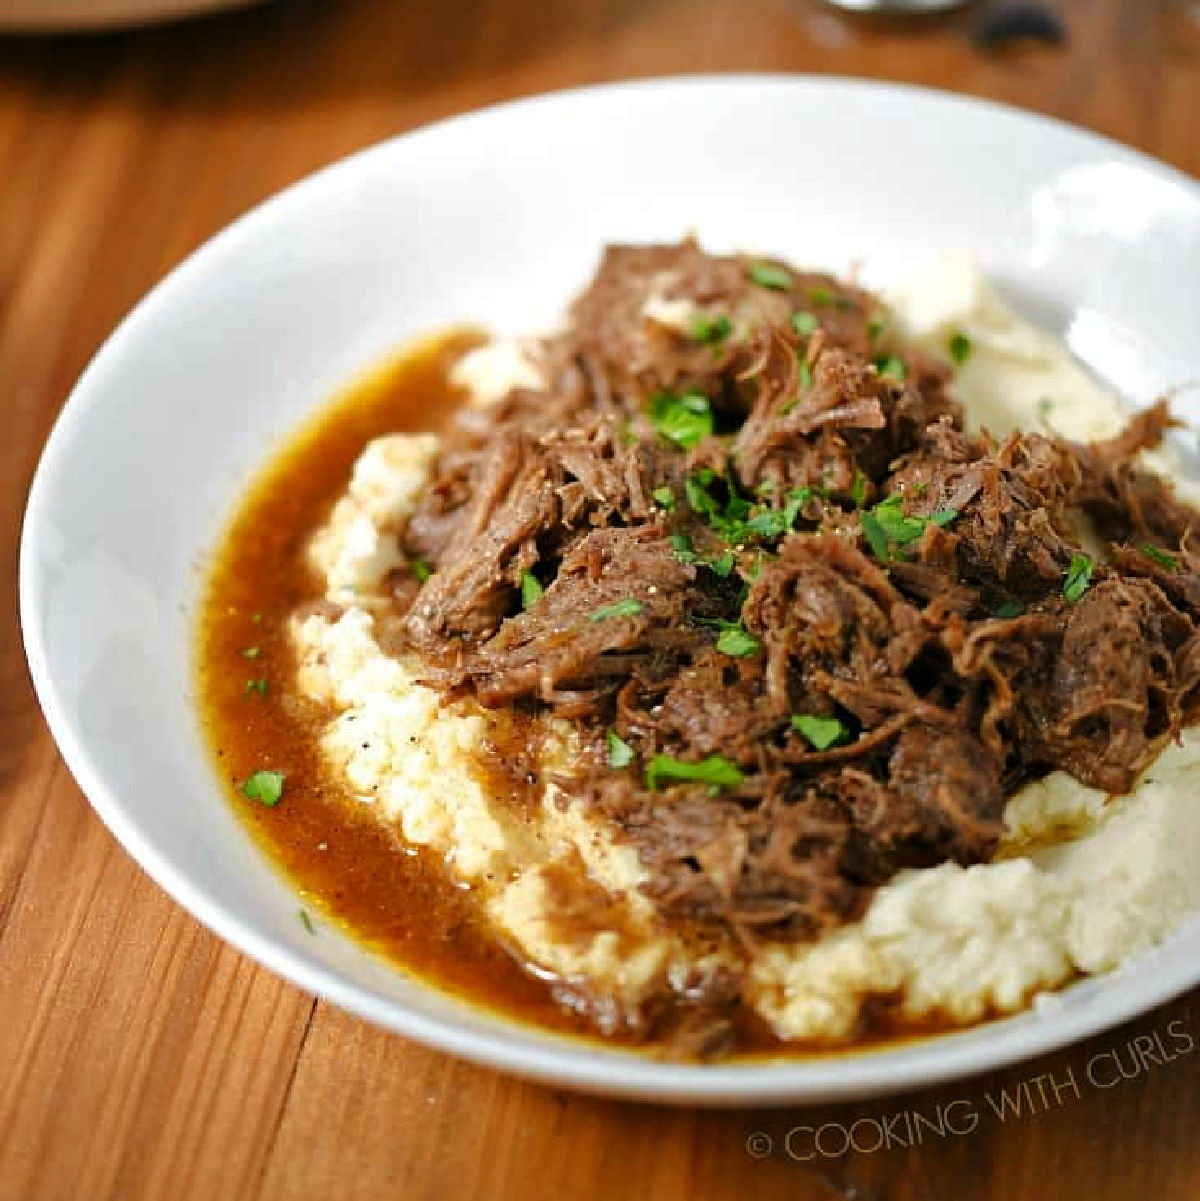 Shredded Cafe Mocha Pot Roast on a bed of mashed potatoes with gravy.